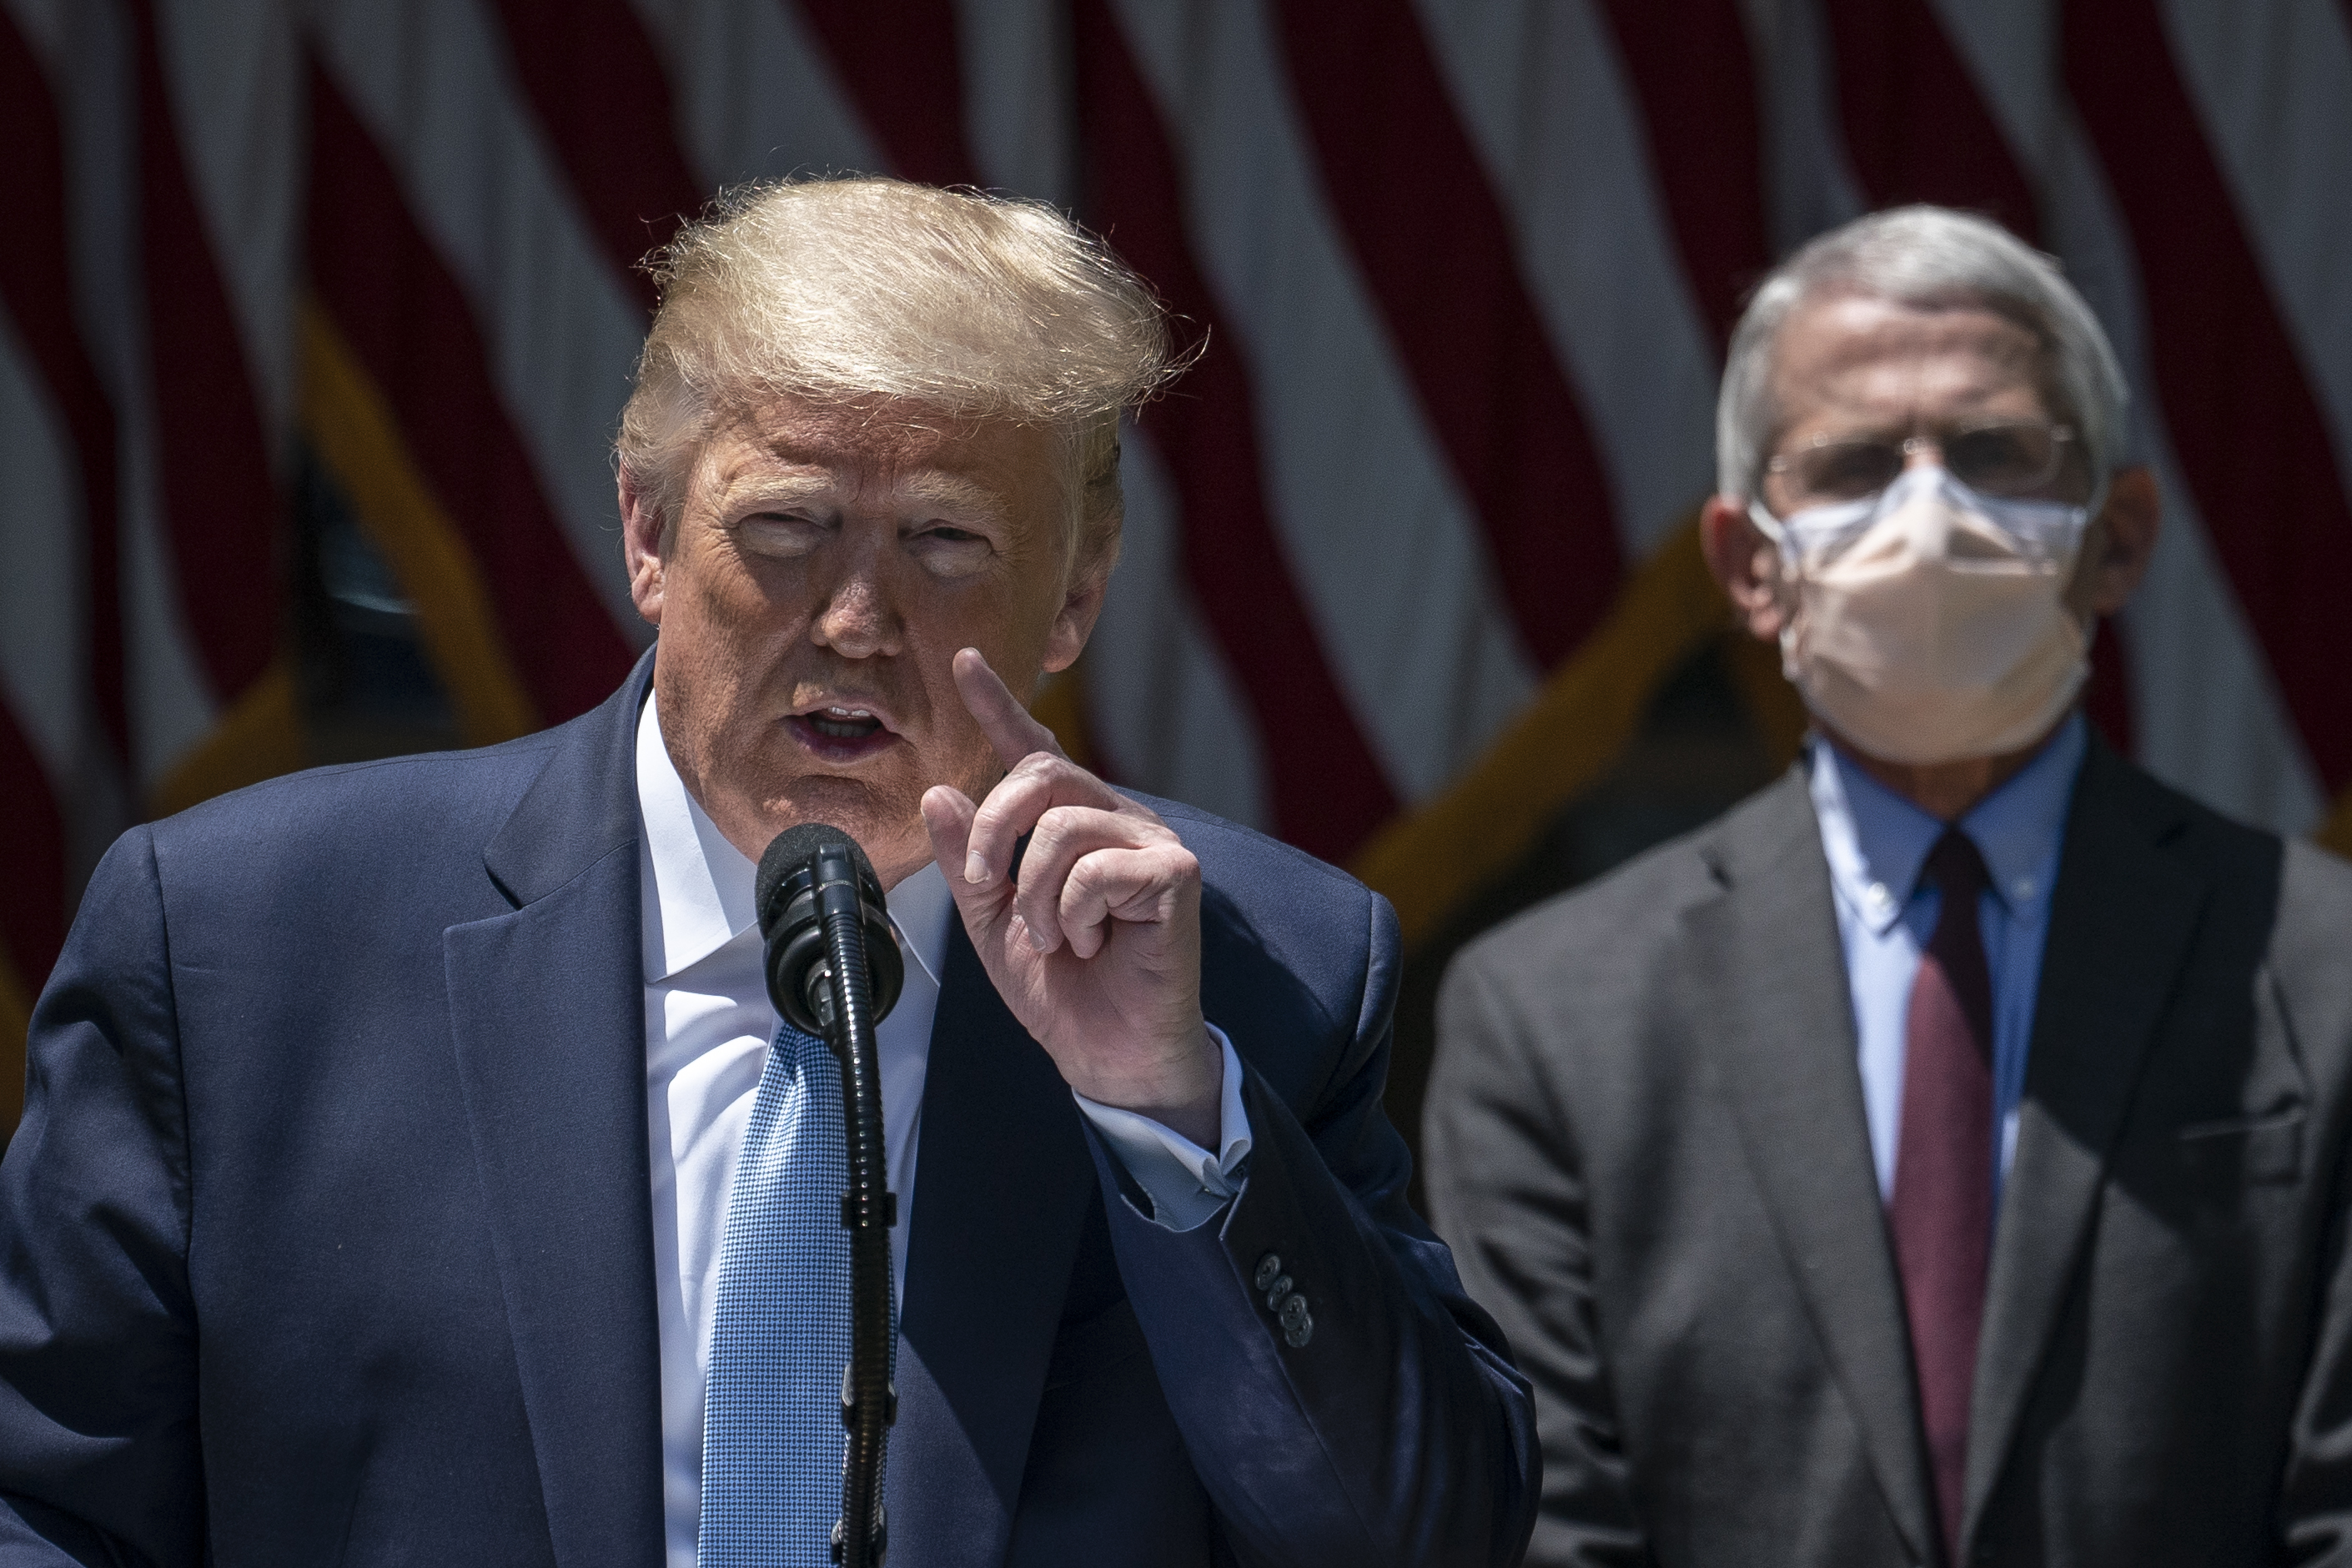 Trump, in a navy blue suit and light blue tie, speaks at a microphone, gesturing with one hand, as Fauci stands beside him, wearing a white mask, gray suit, and dark red tie.